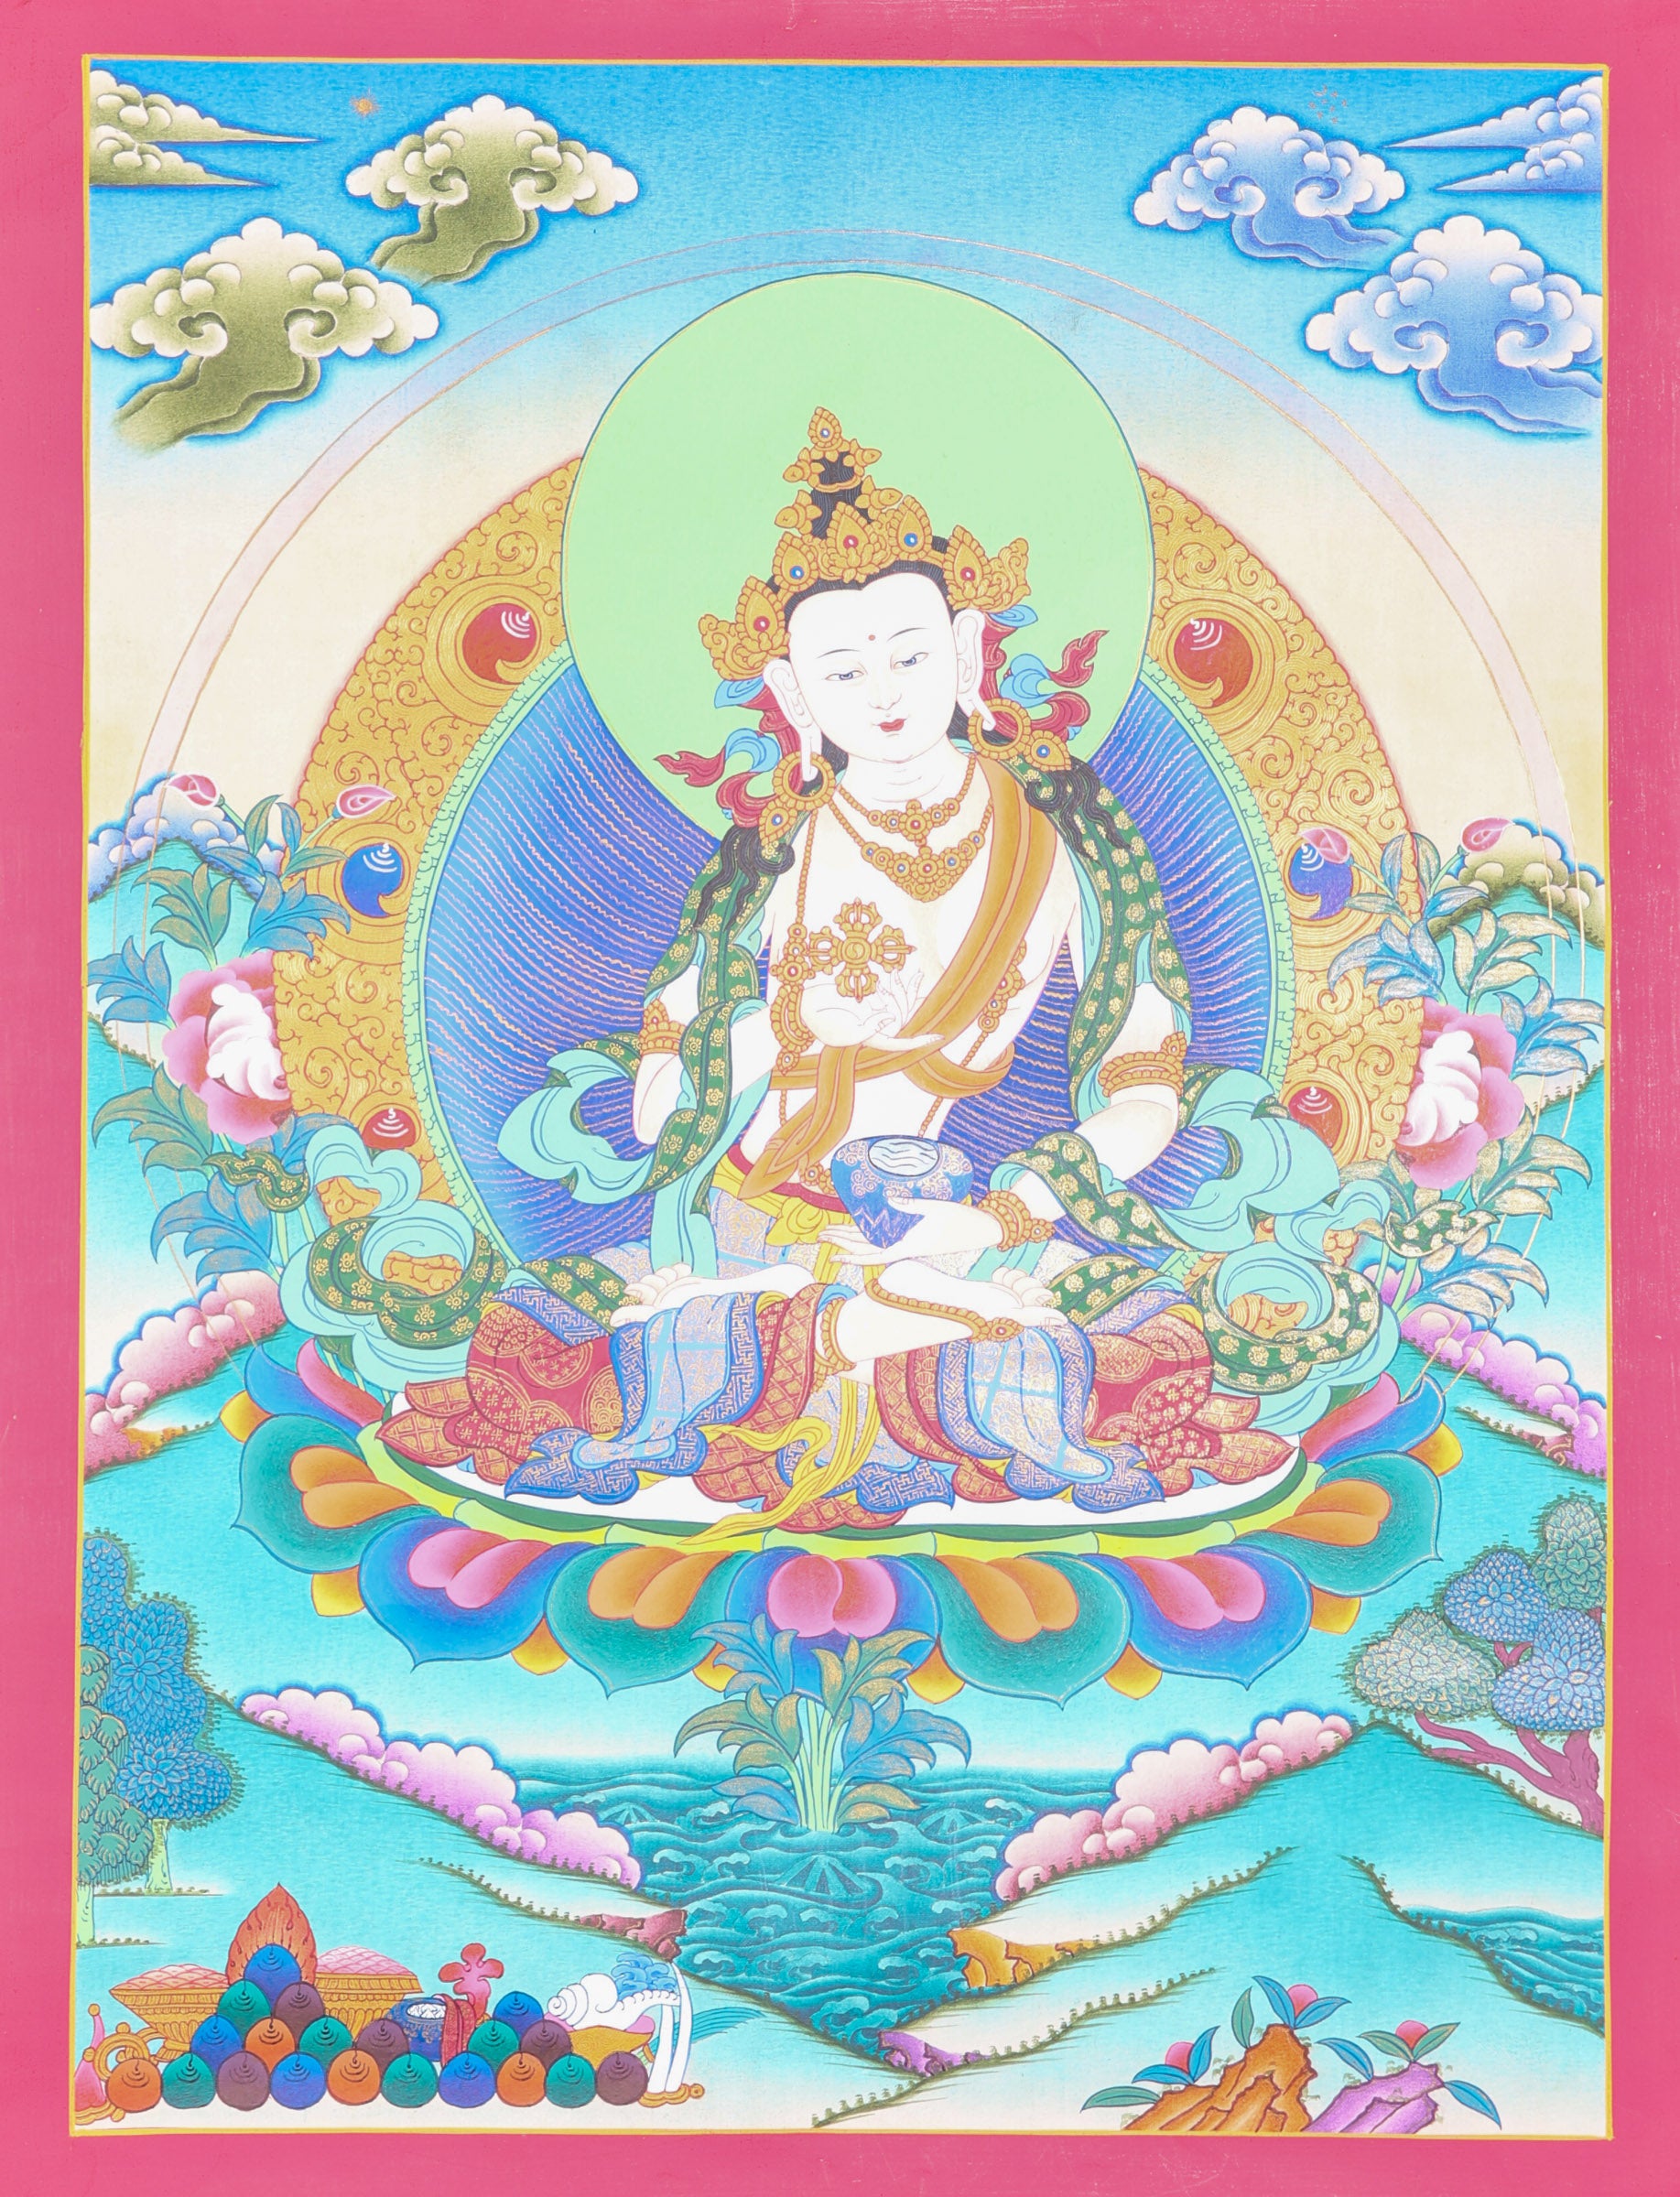 Vajrasattva Thangka Painting for religious and spiritual practices.